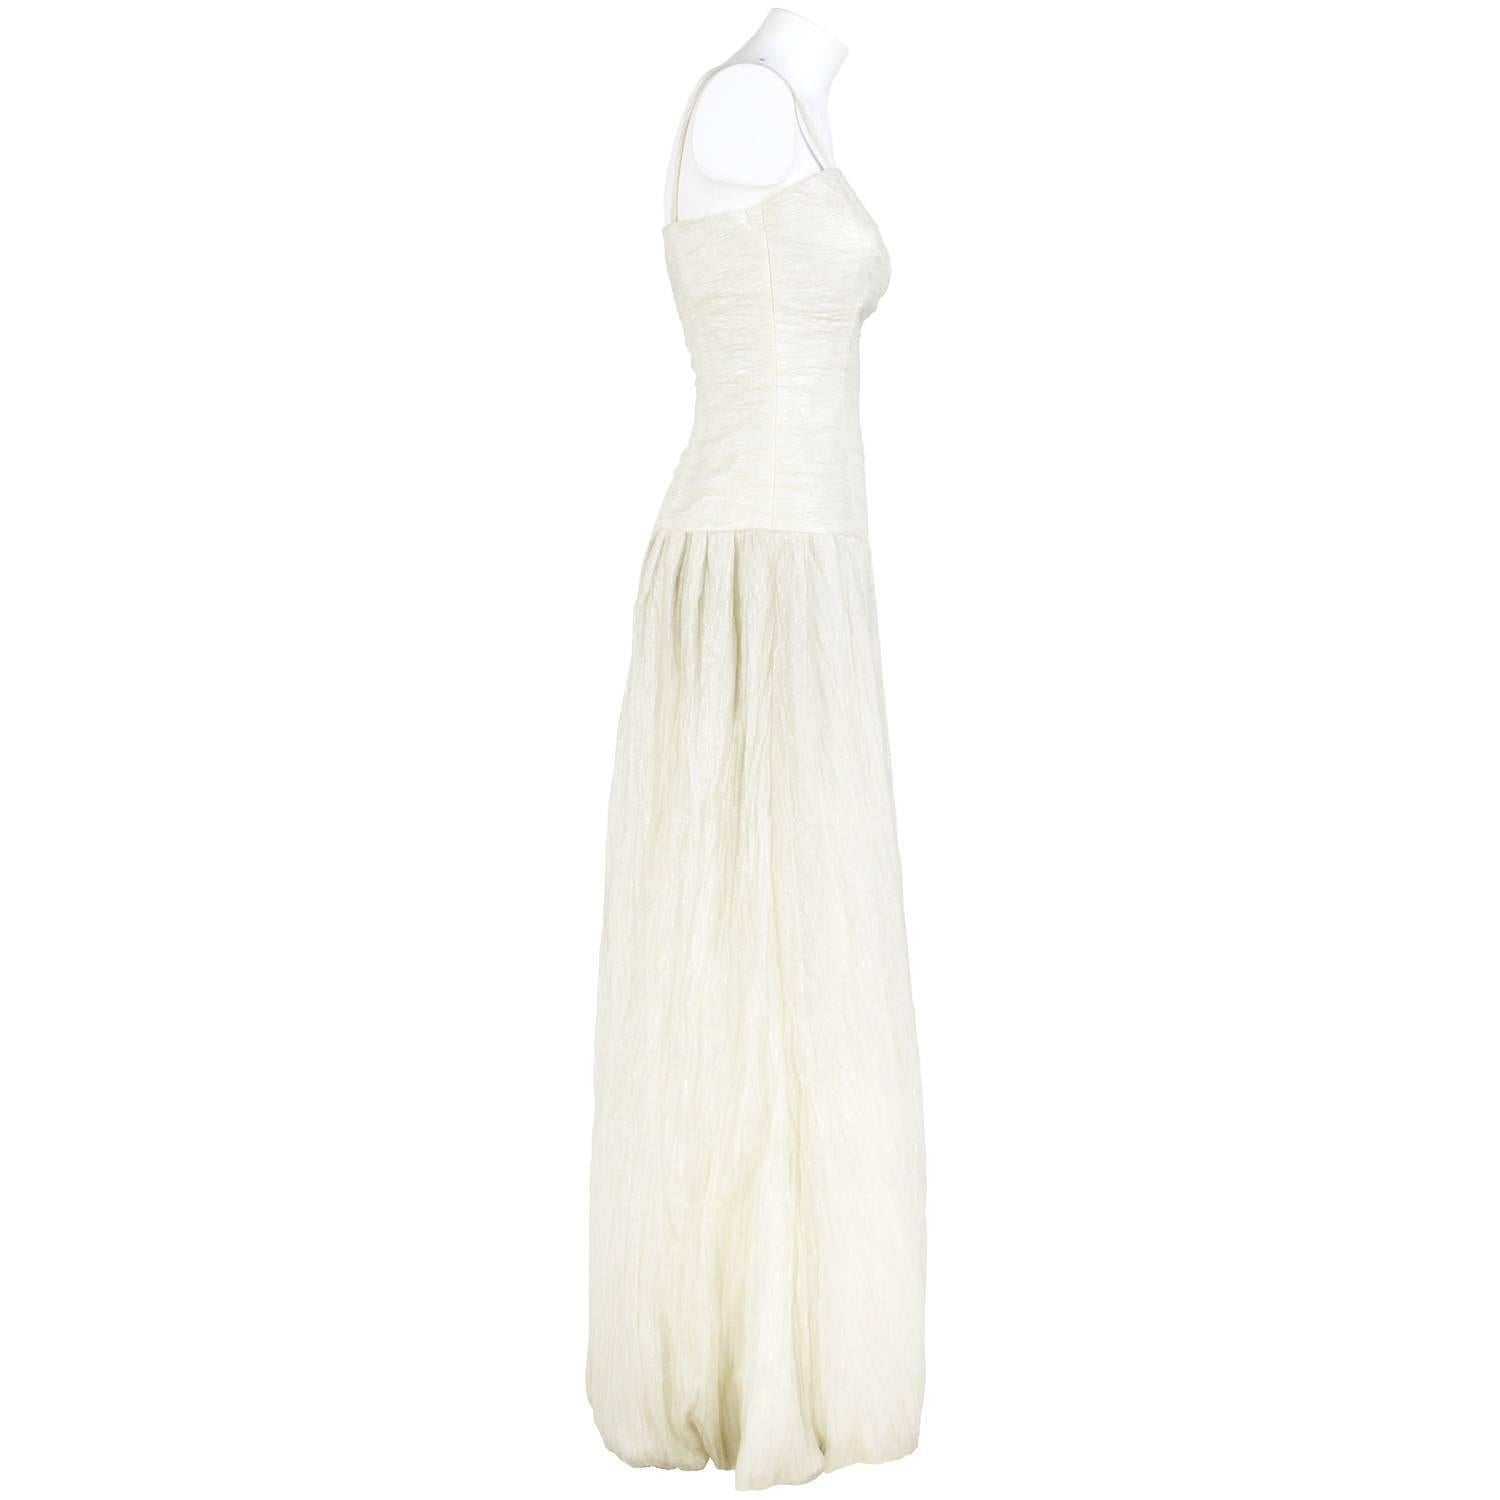 Beautiful Douglas wedding dress in cream color with thin straps and wide skirt lightly pleated. The item was produced in the 2000s and is in excellent conditions.
Height: 150 cm
Bust: 38 cm
Waist: 32 cm